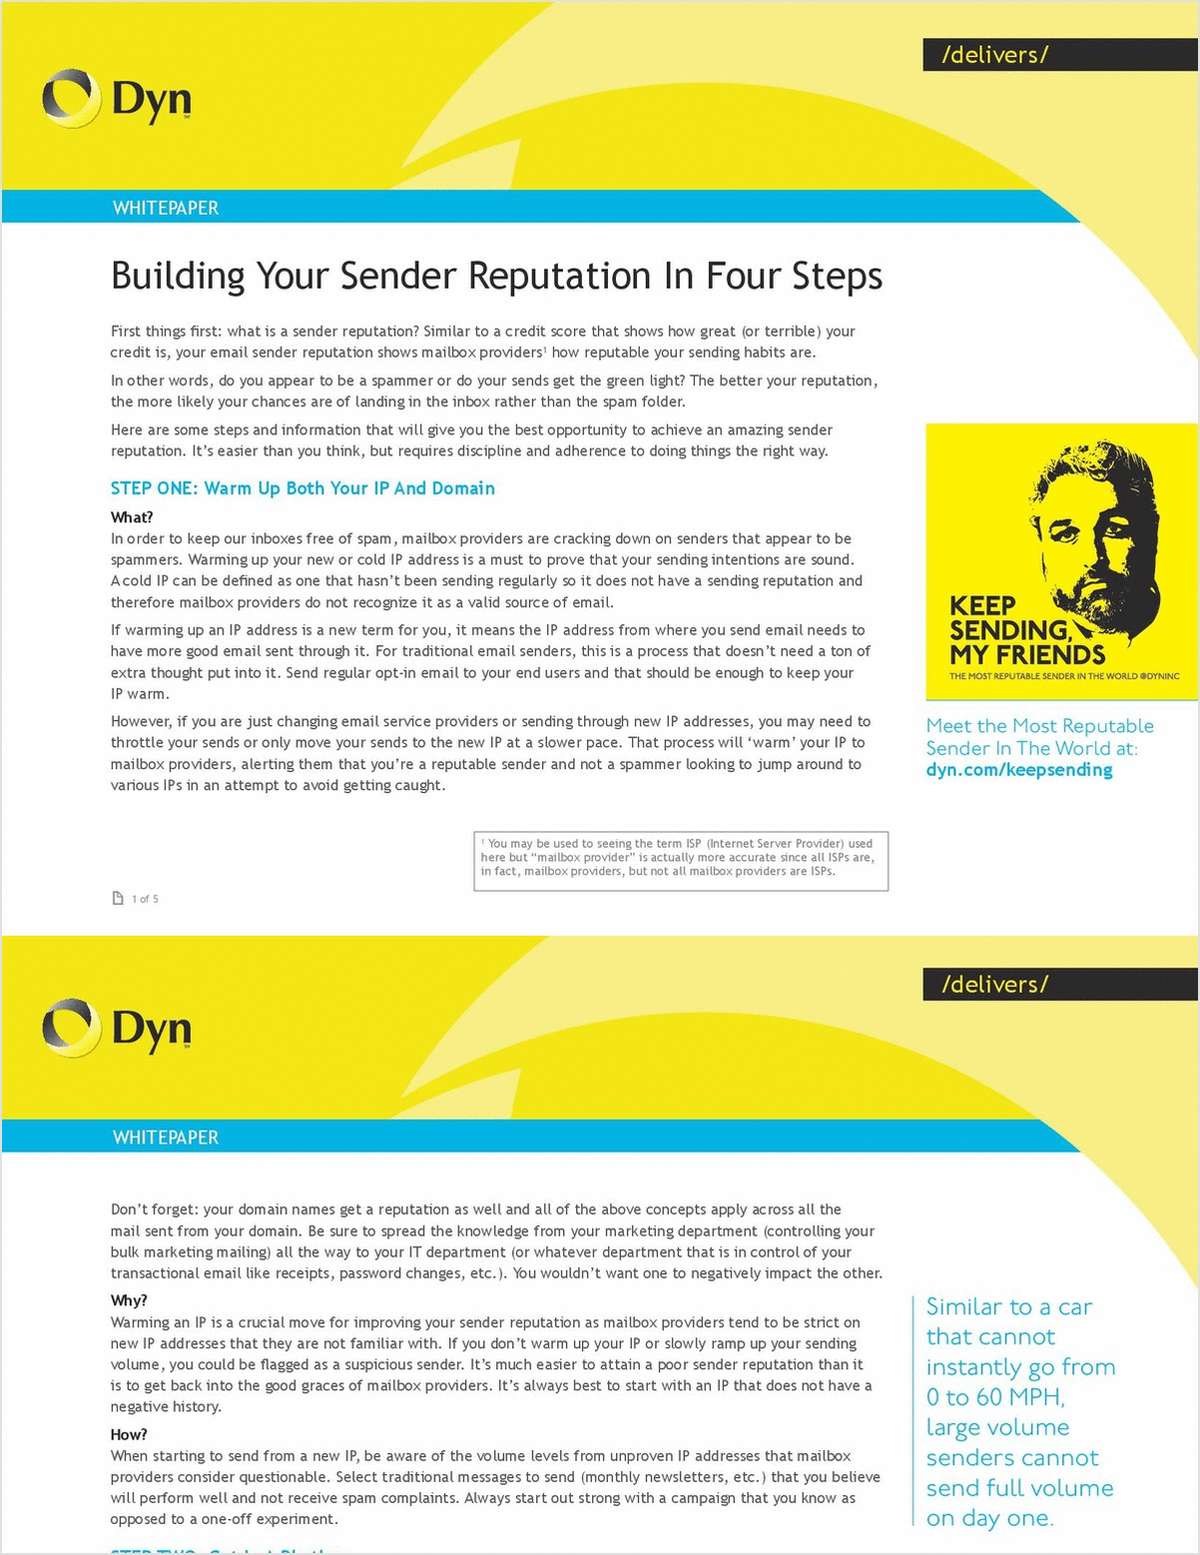 Build your Sender Reputation in Four Steps